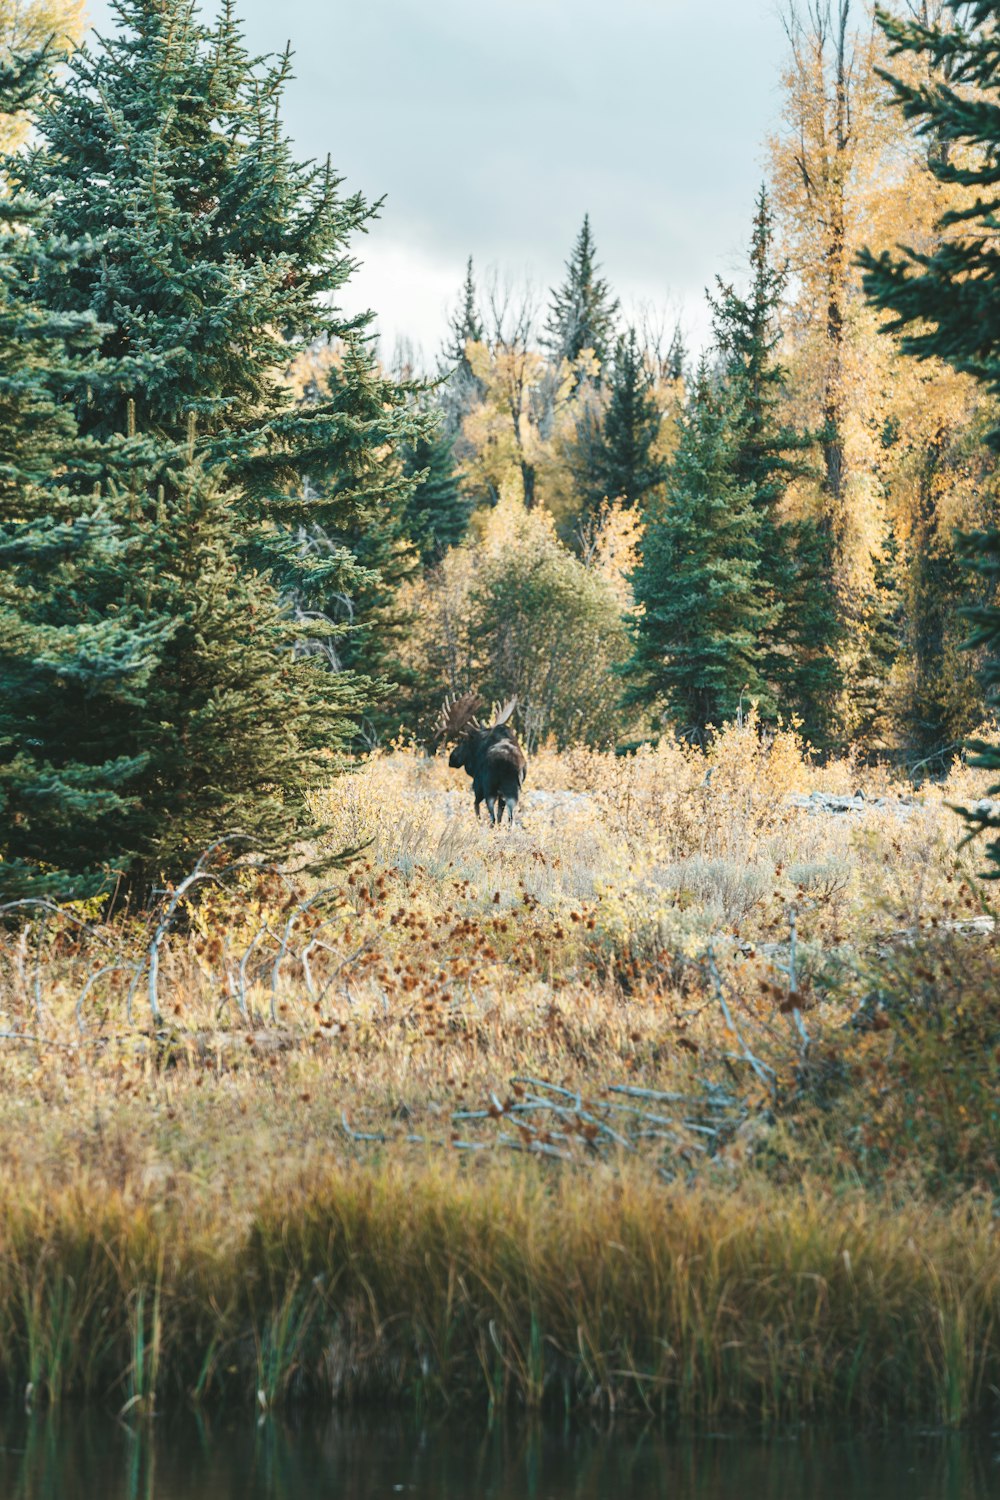 a moose standing in a field next to a forest